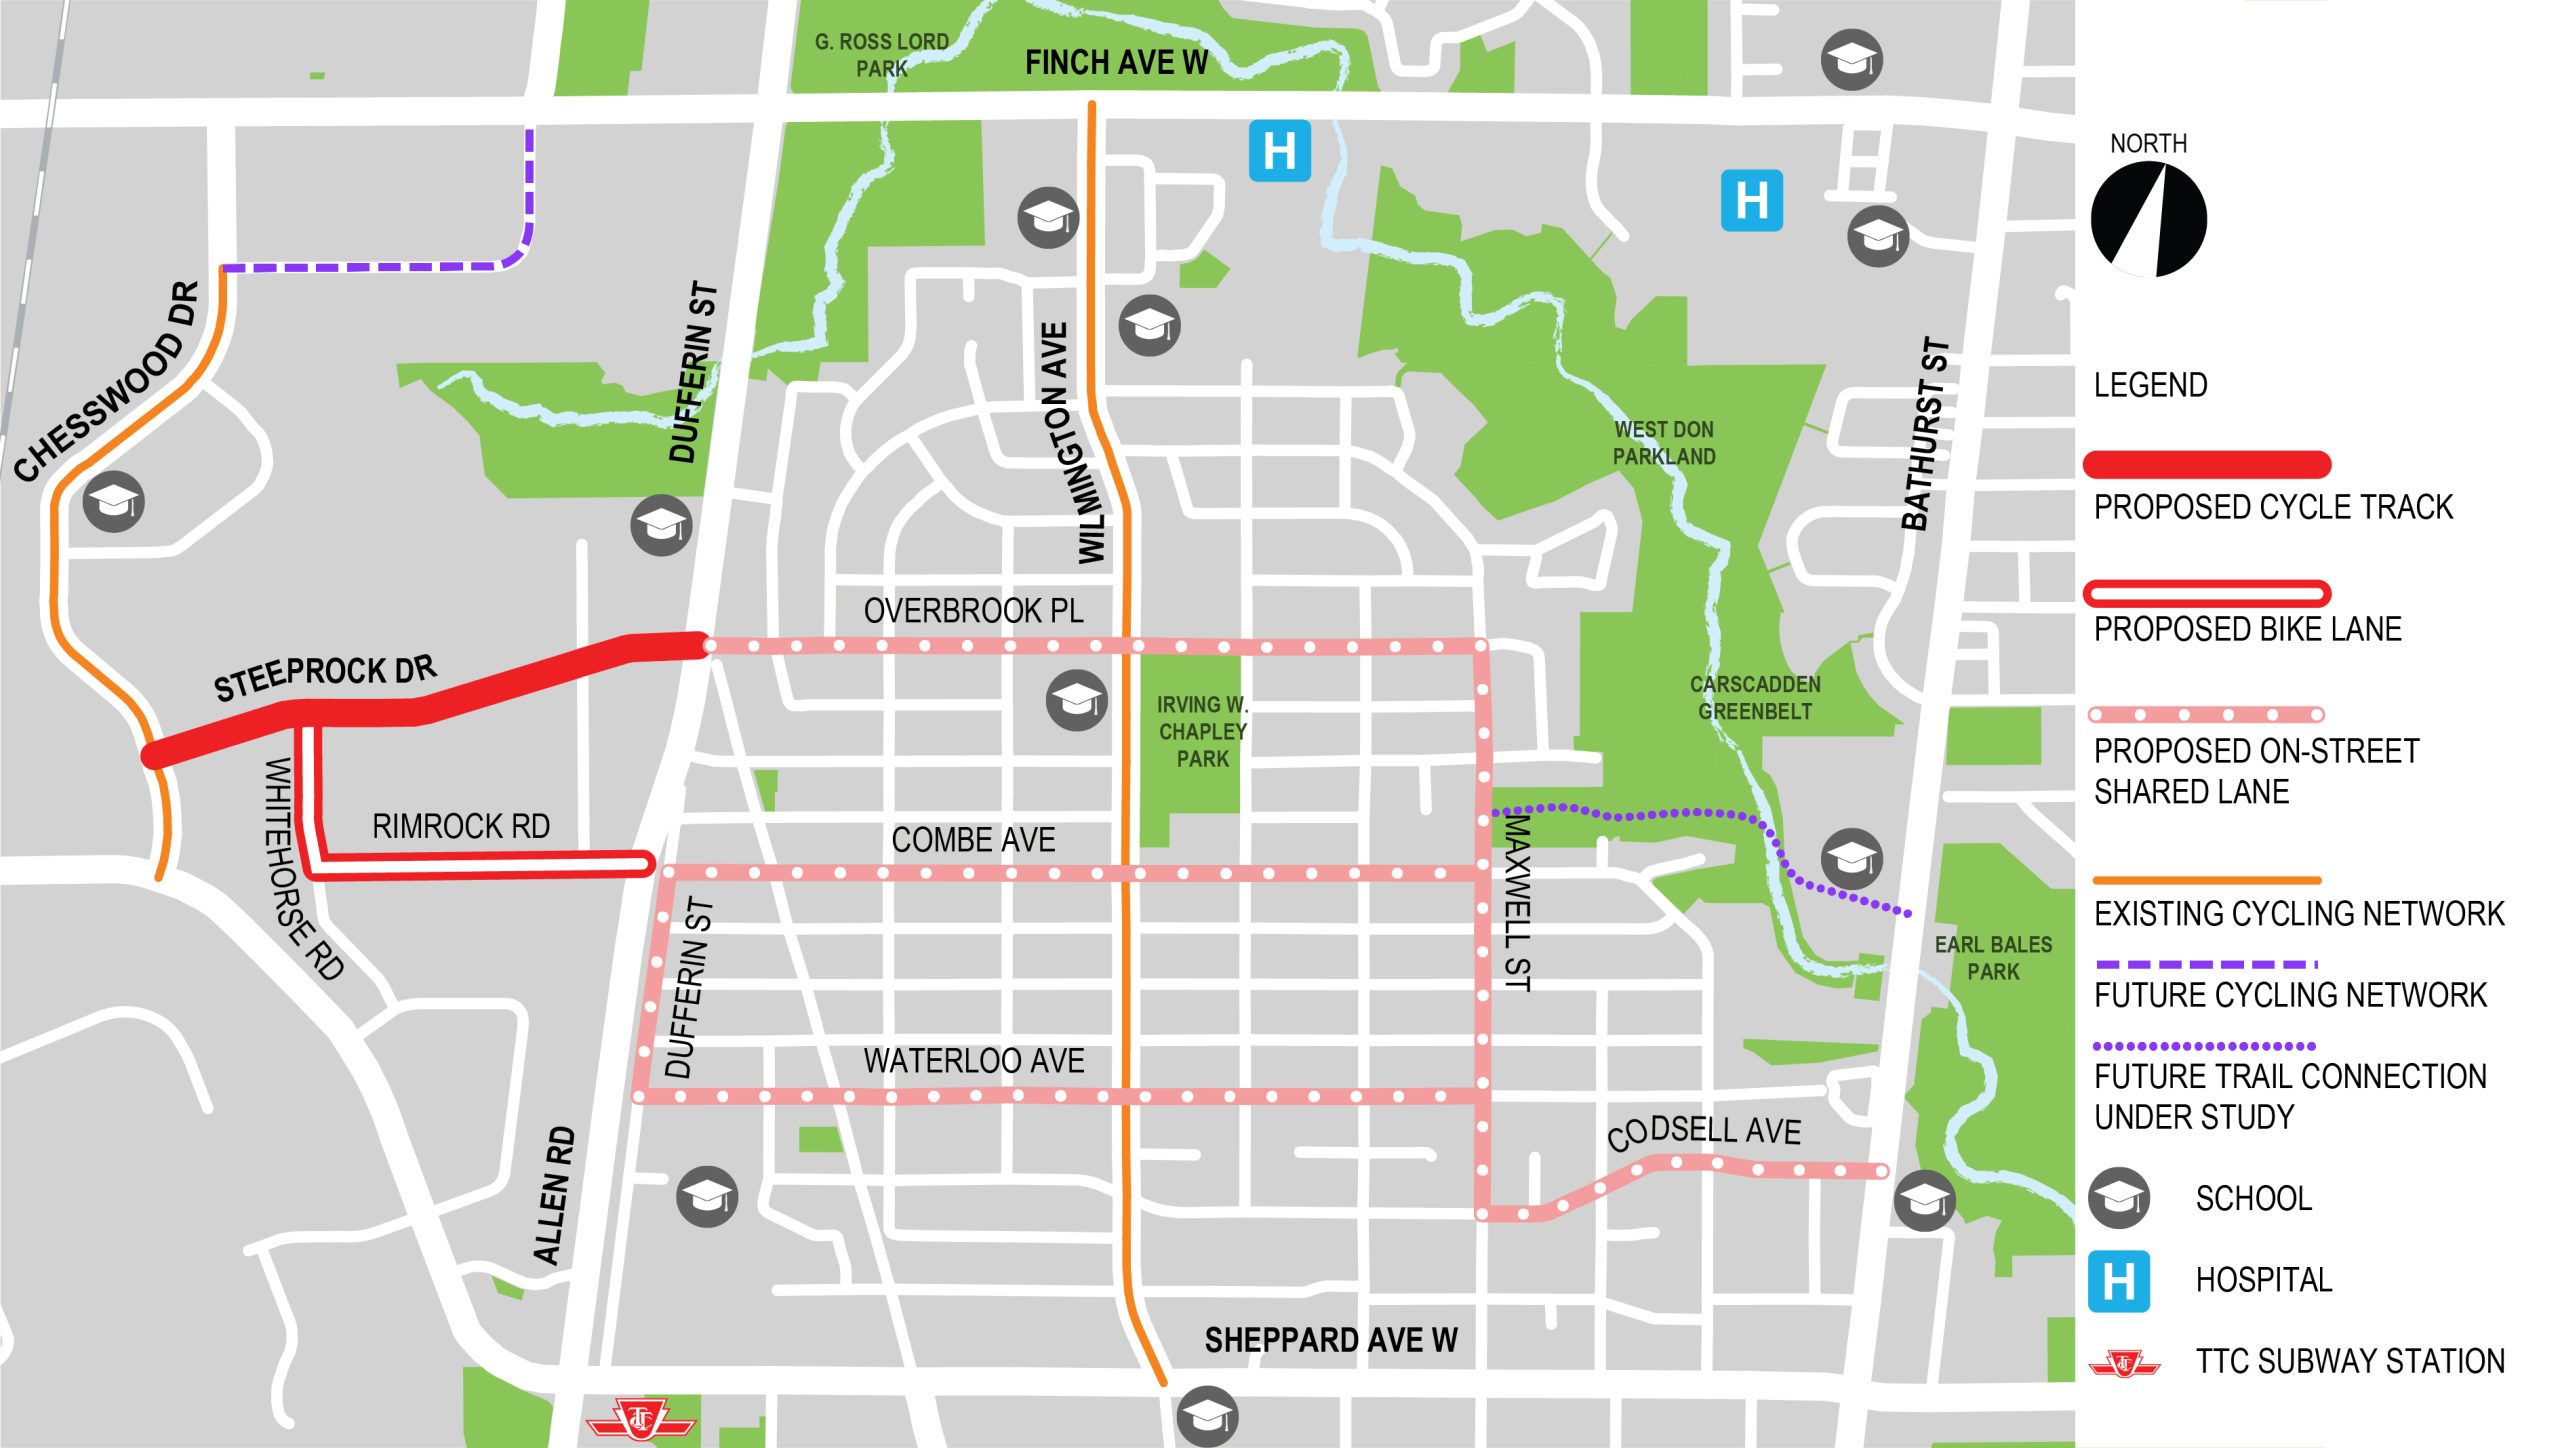 Map showing locations of proposed cycle tracks, bike lanes and on-street shared lane markings, as well as location of existing and approved bikeways on Chesswood Drive and Champagne Drive. Also shows location of a future potential trail connection through the West Don parklands.